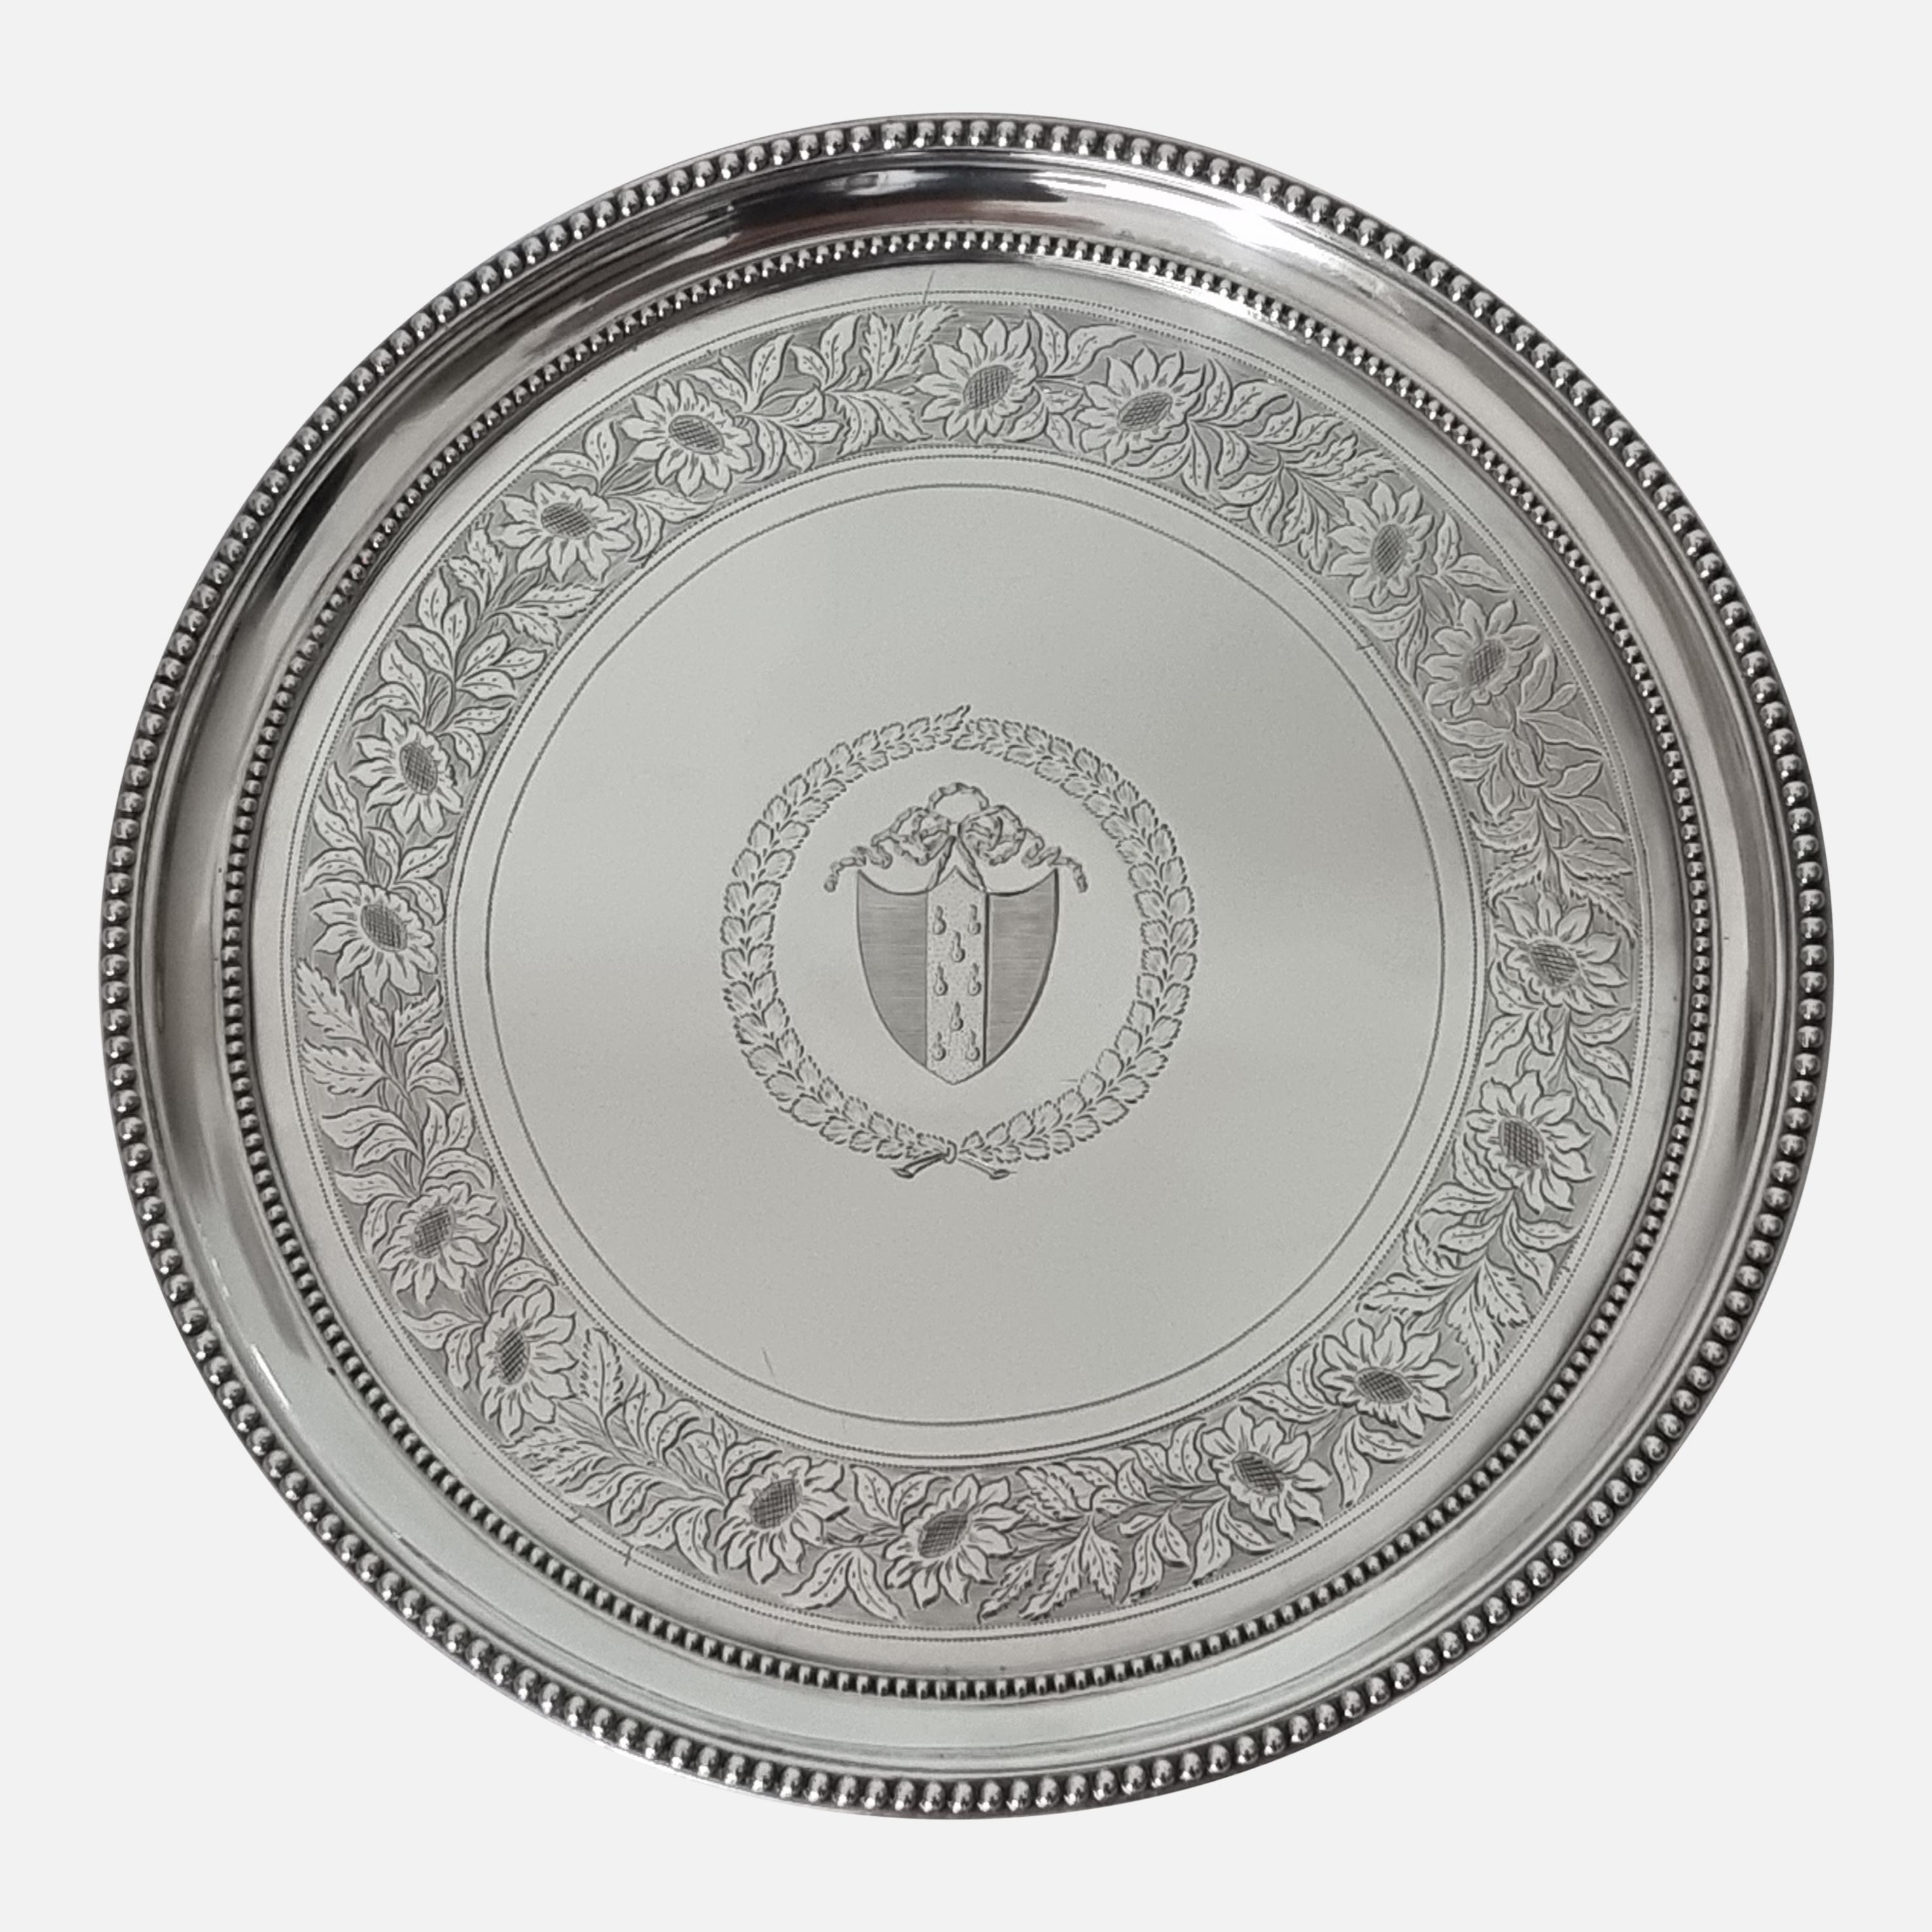 A George III sterling silver salver. The salver is of circular form, beaded borders, with a band of chased foliate decoration, the centre with an armorial within foliate mantling, on three fluted bracket feet.

The hallmarks are located to the